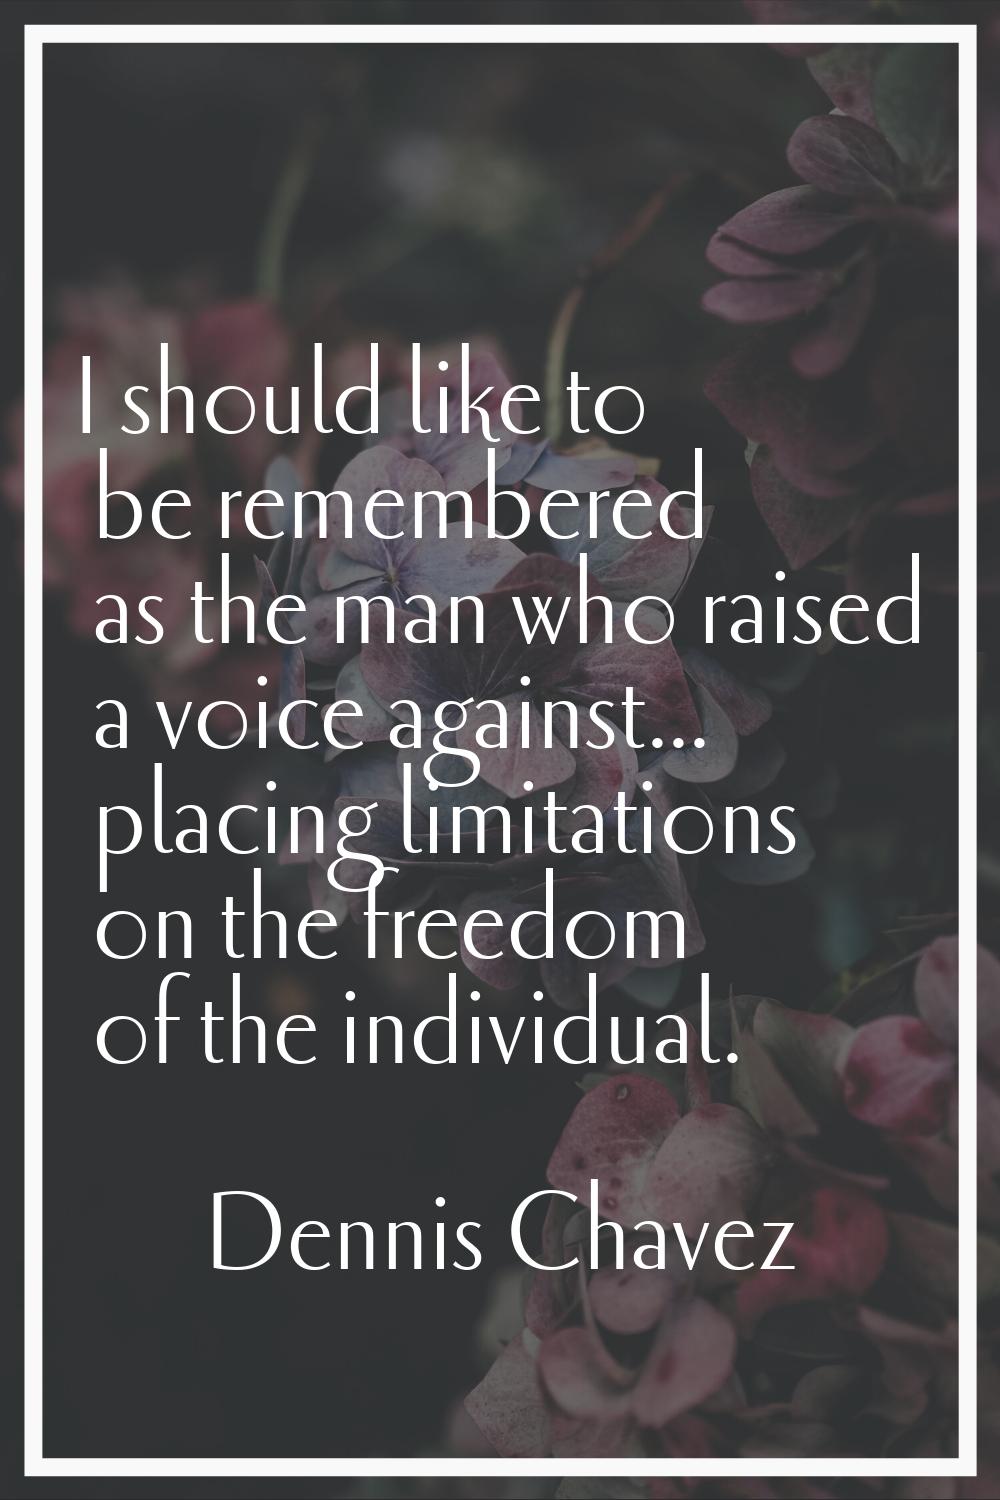 I should like to be remembered as the man who raised a voice against... placing limitations on the 